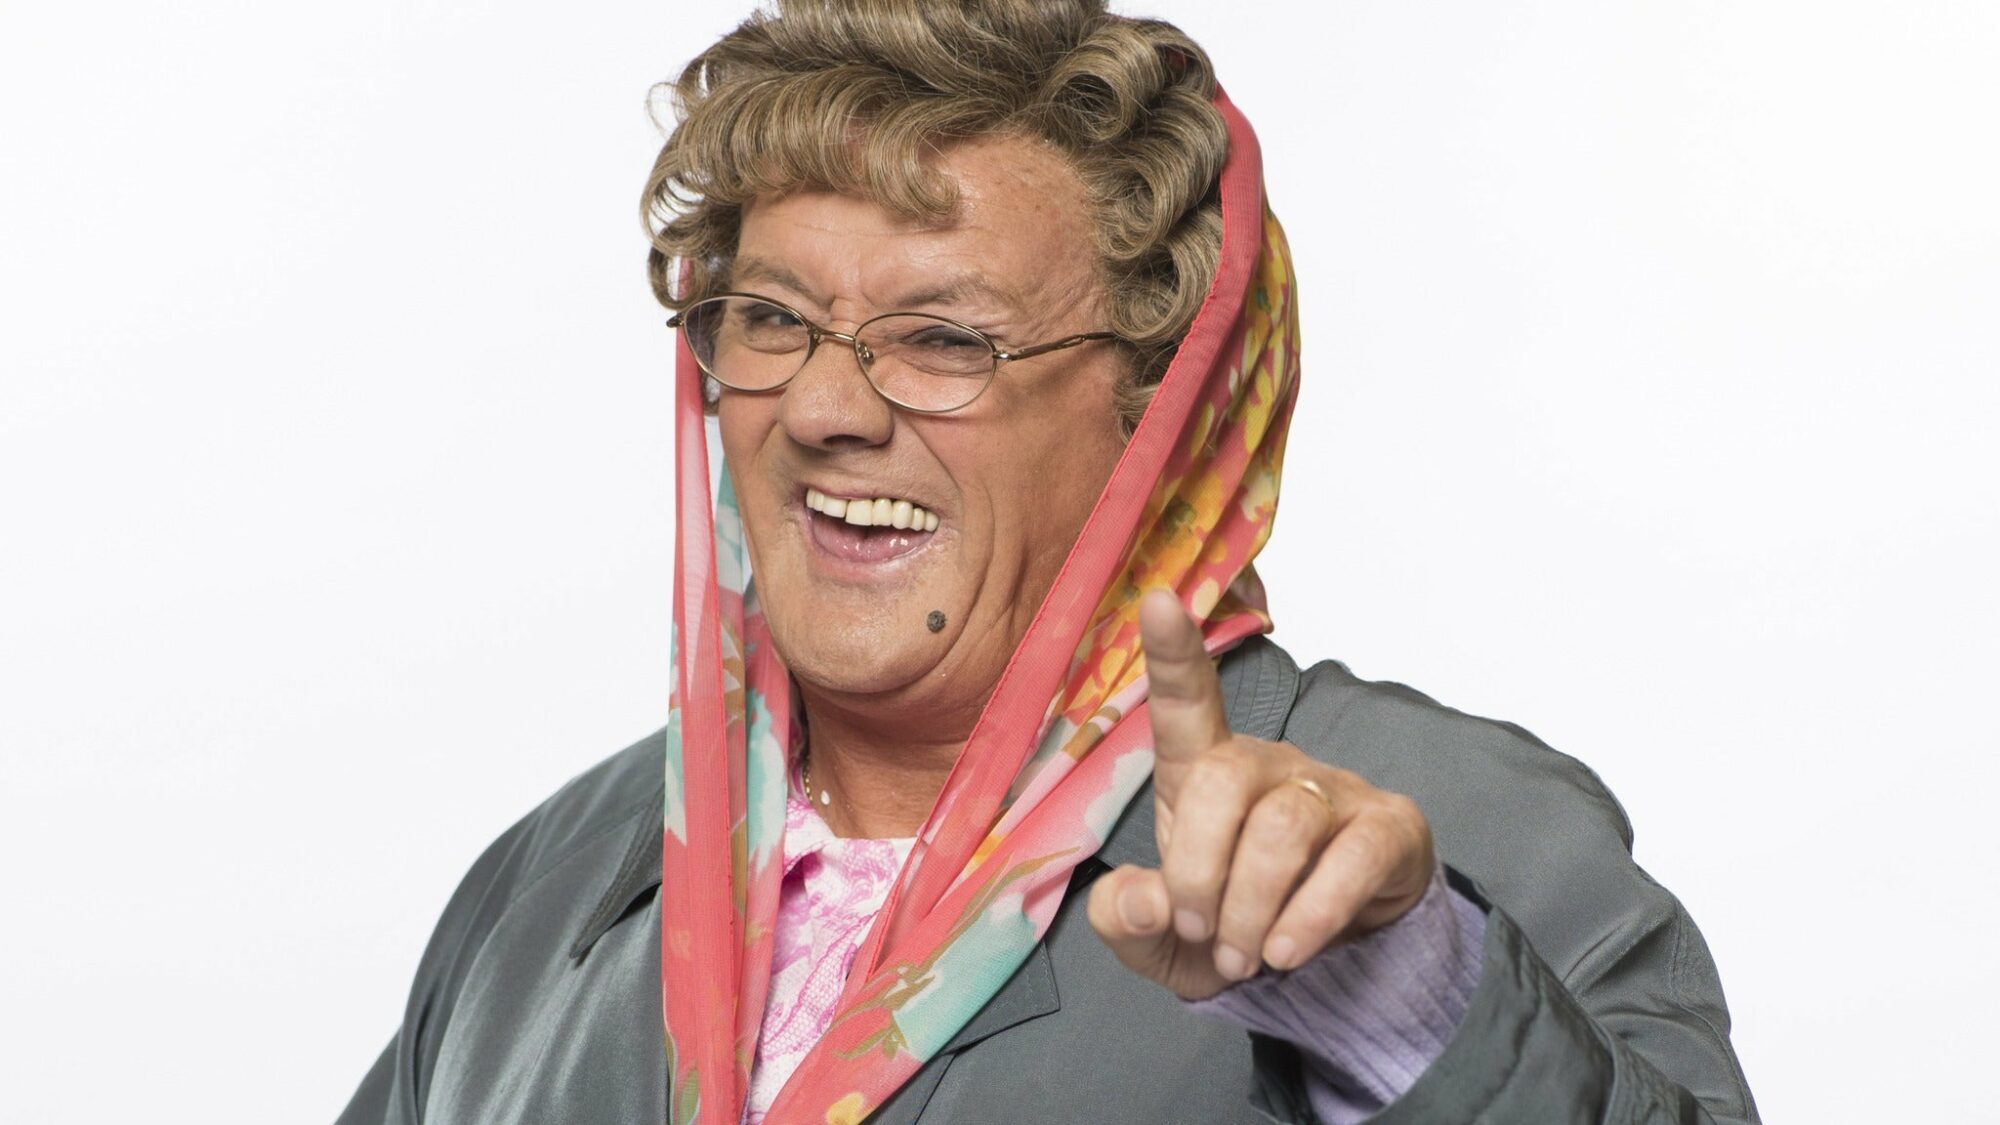 Image name Mrs Browns Boys Mrs Brown Rides Again at Bonus Arena Hull Hull the 6 image from the post Mrs Brown's Boys - Mrs Brown Rides Again at Connexin Live, Hull in Yorkshire.com.